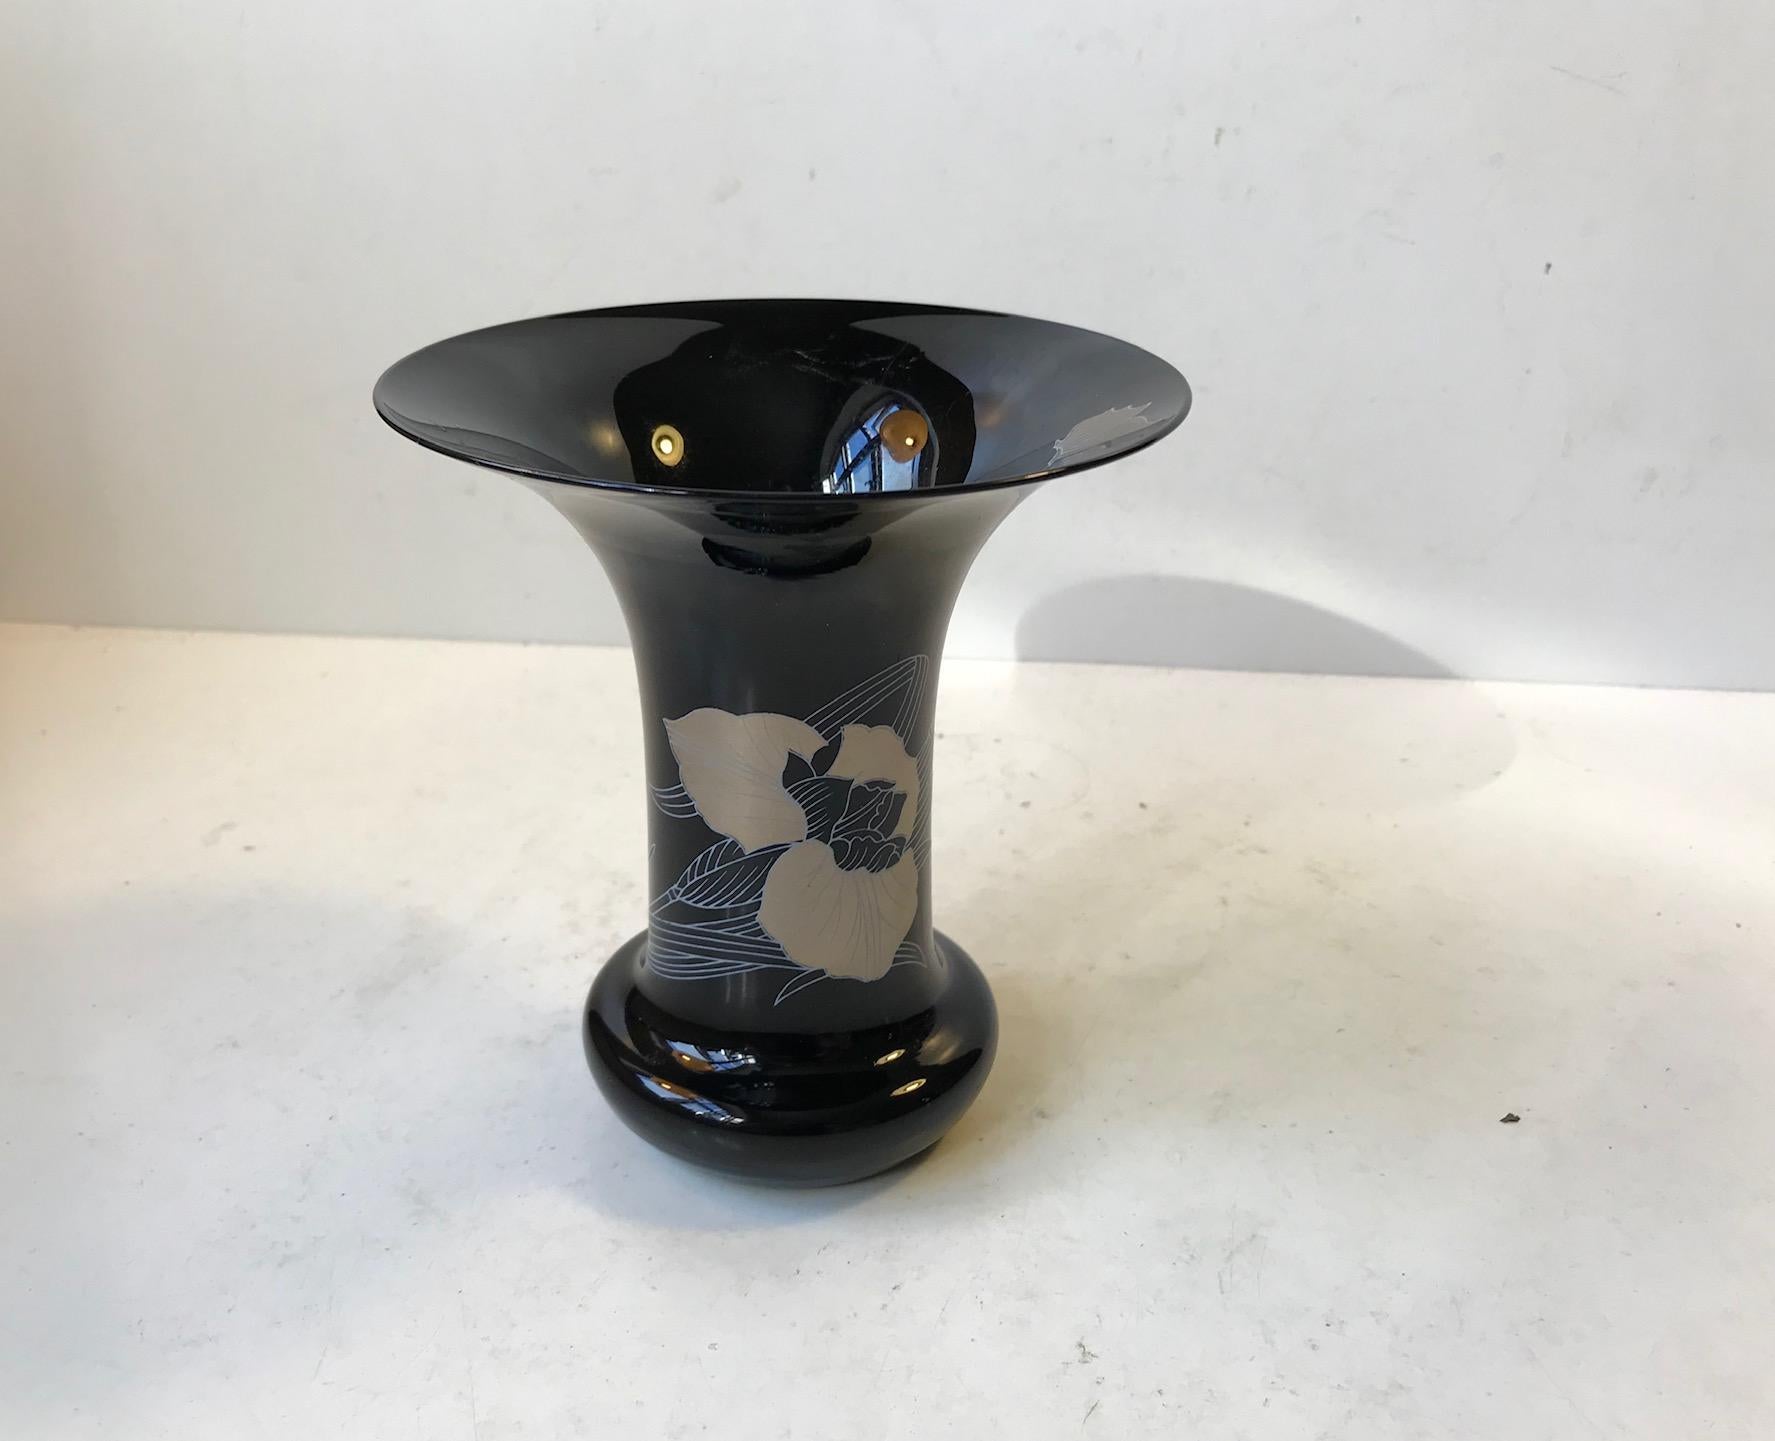 Delicate black glass vase decorated with gold flowers by Leonard Paris. It was manufactured in Germany by Hutschenreuther during the 1980s.